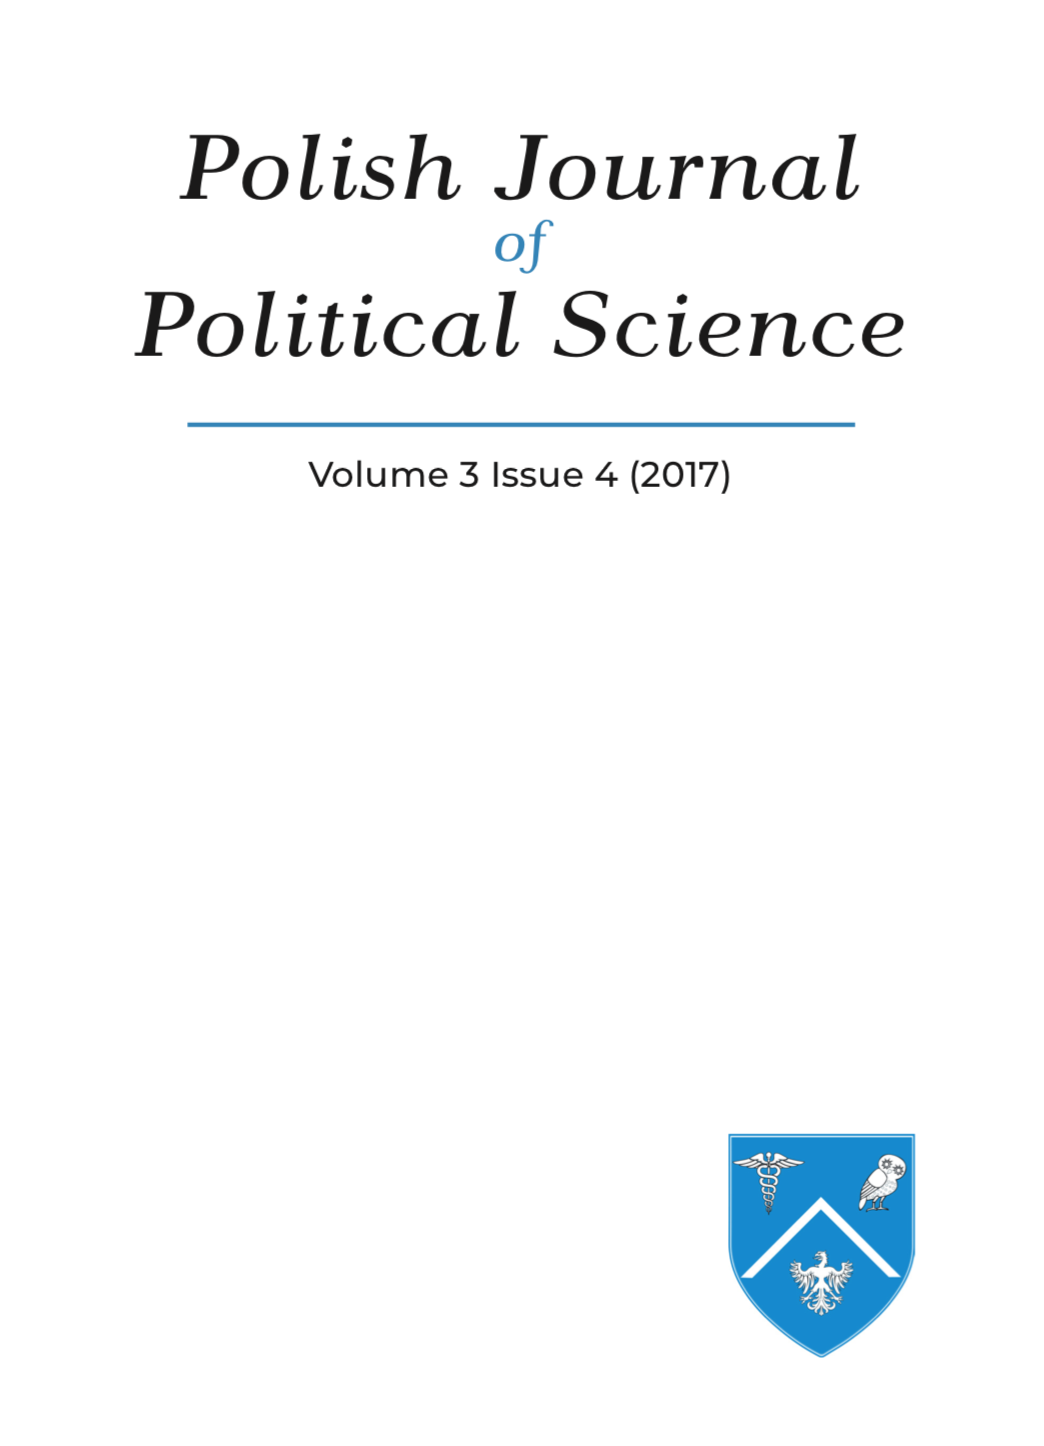 Polish Journal of Political Science